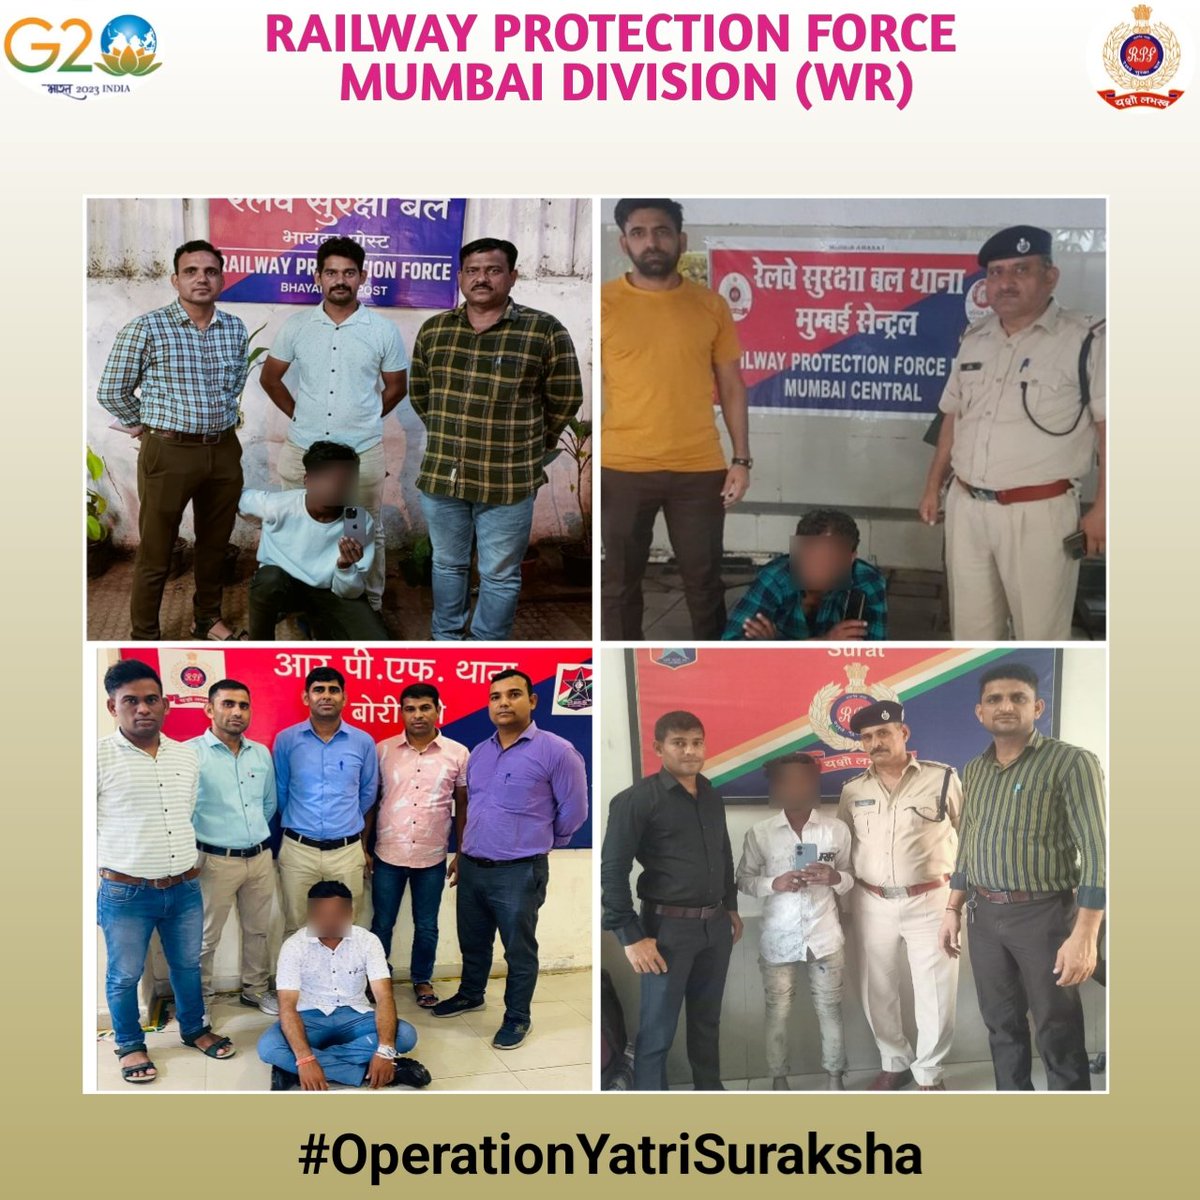 #OperationYatriSuraksha 
Vigilant staff of  #RPF nabbed 04 thieves at Borivali, Mumbai central, Bhayandar & Surat with the help of #CCTV surveillance. Handed over to #GRP for further action.
#ActionAgainstCrime 
#SentinelsOnRail 
@drmbct @WesternRly @RPF_INDIA @rpfwr1